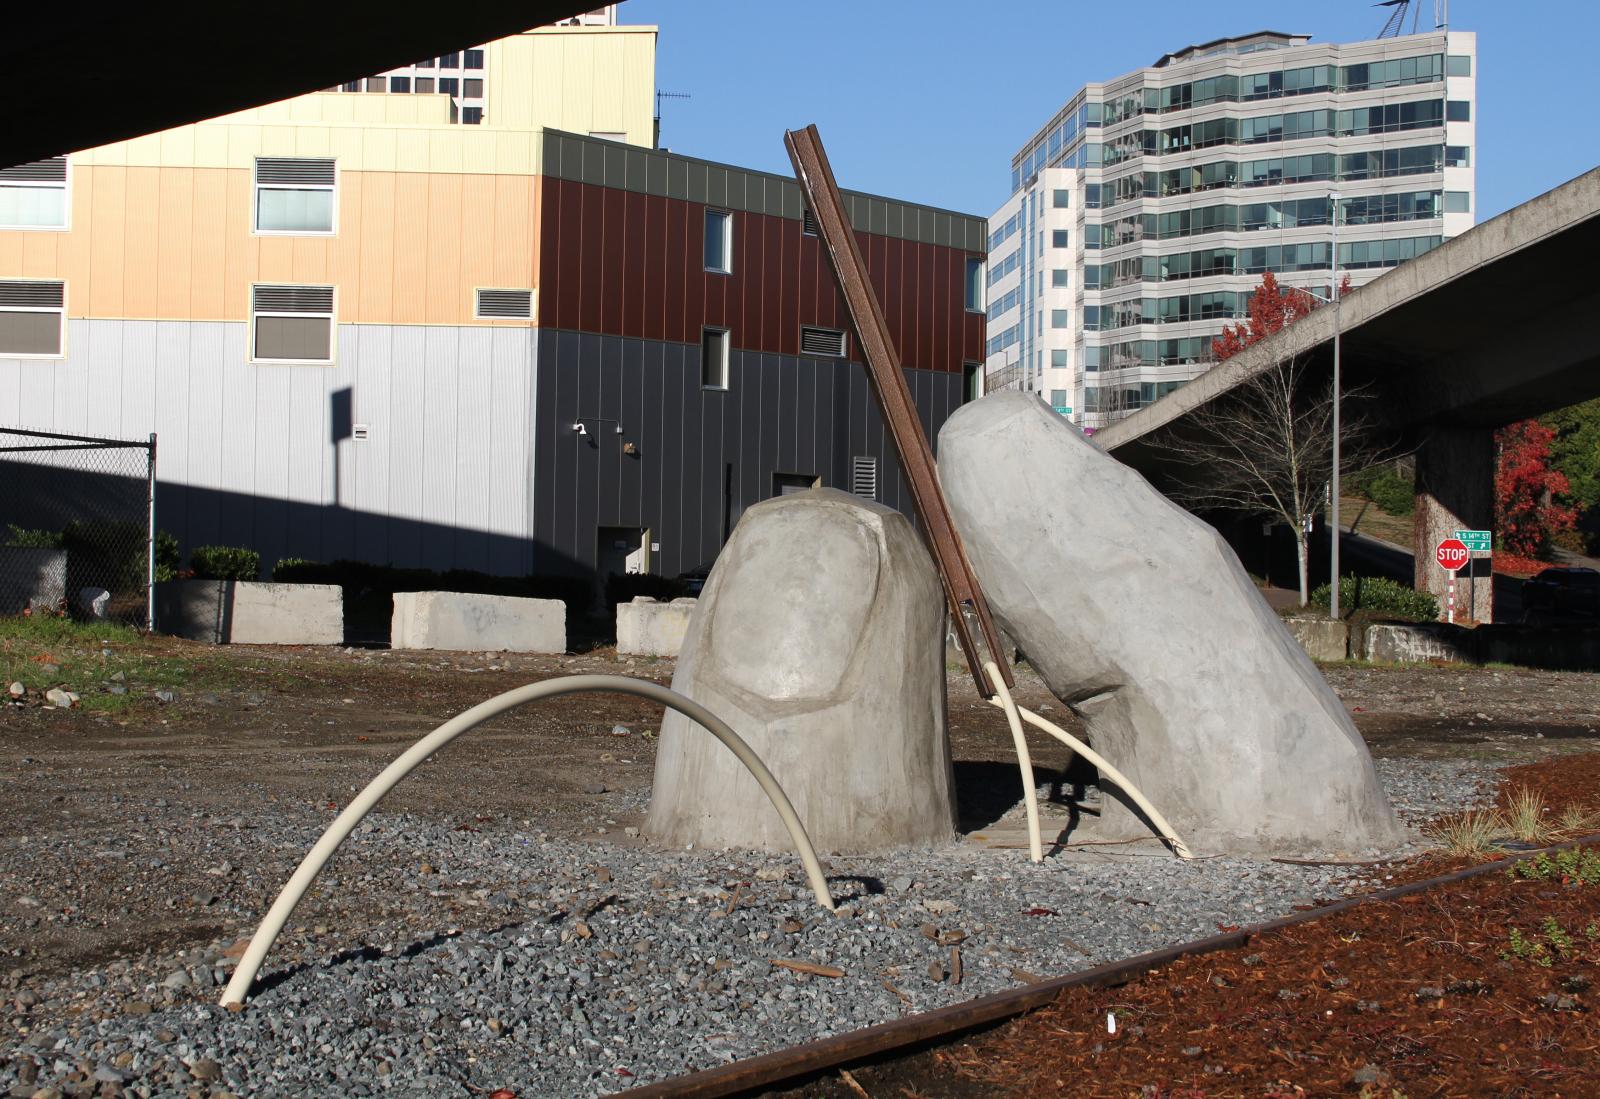 The completed art piece, a sculpture of a thumb and forefinger holding a needle made of repurposed steel rail